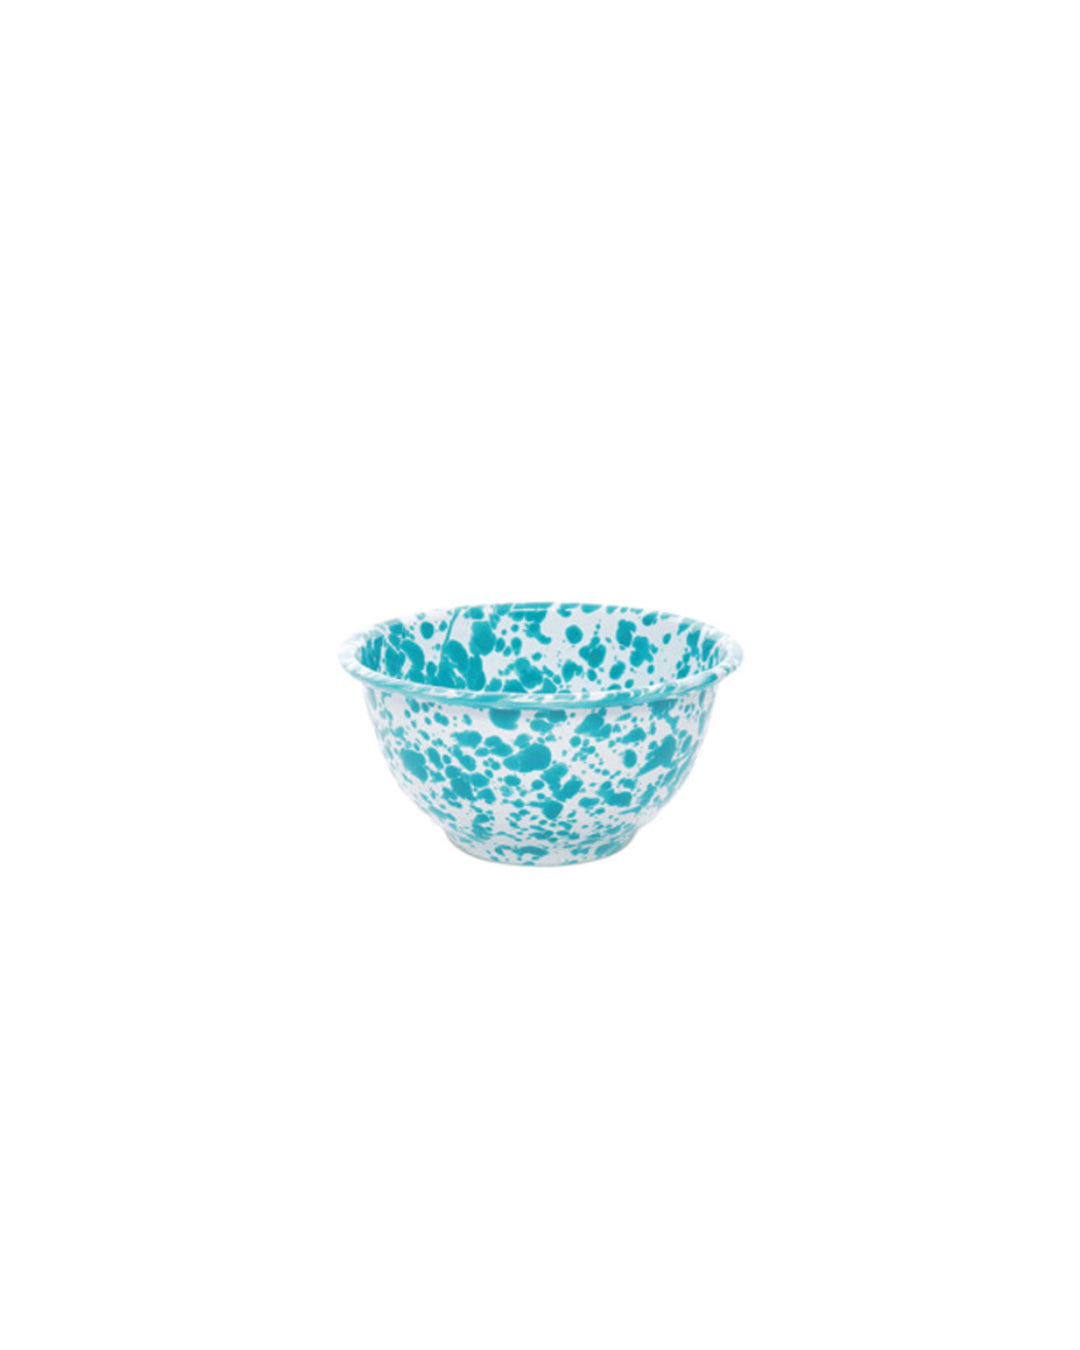 Crow Canyon Splatter Small Footed Bowl